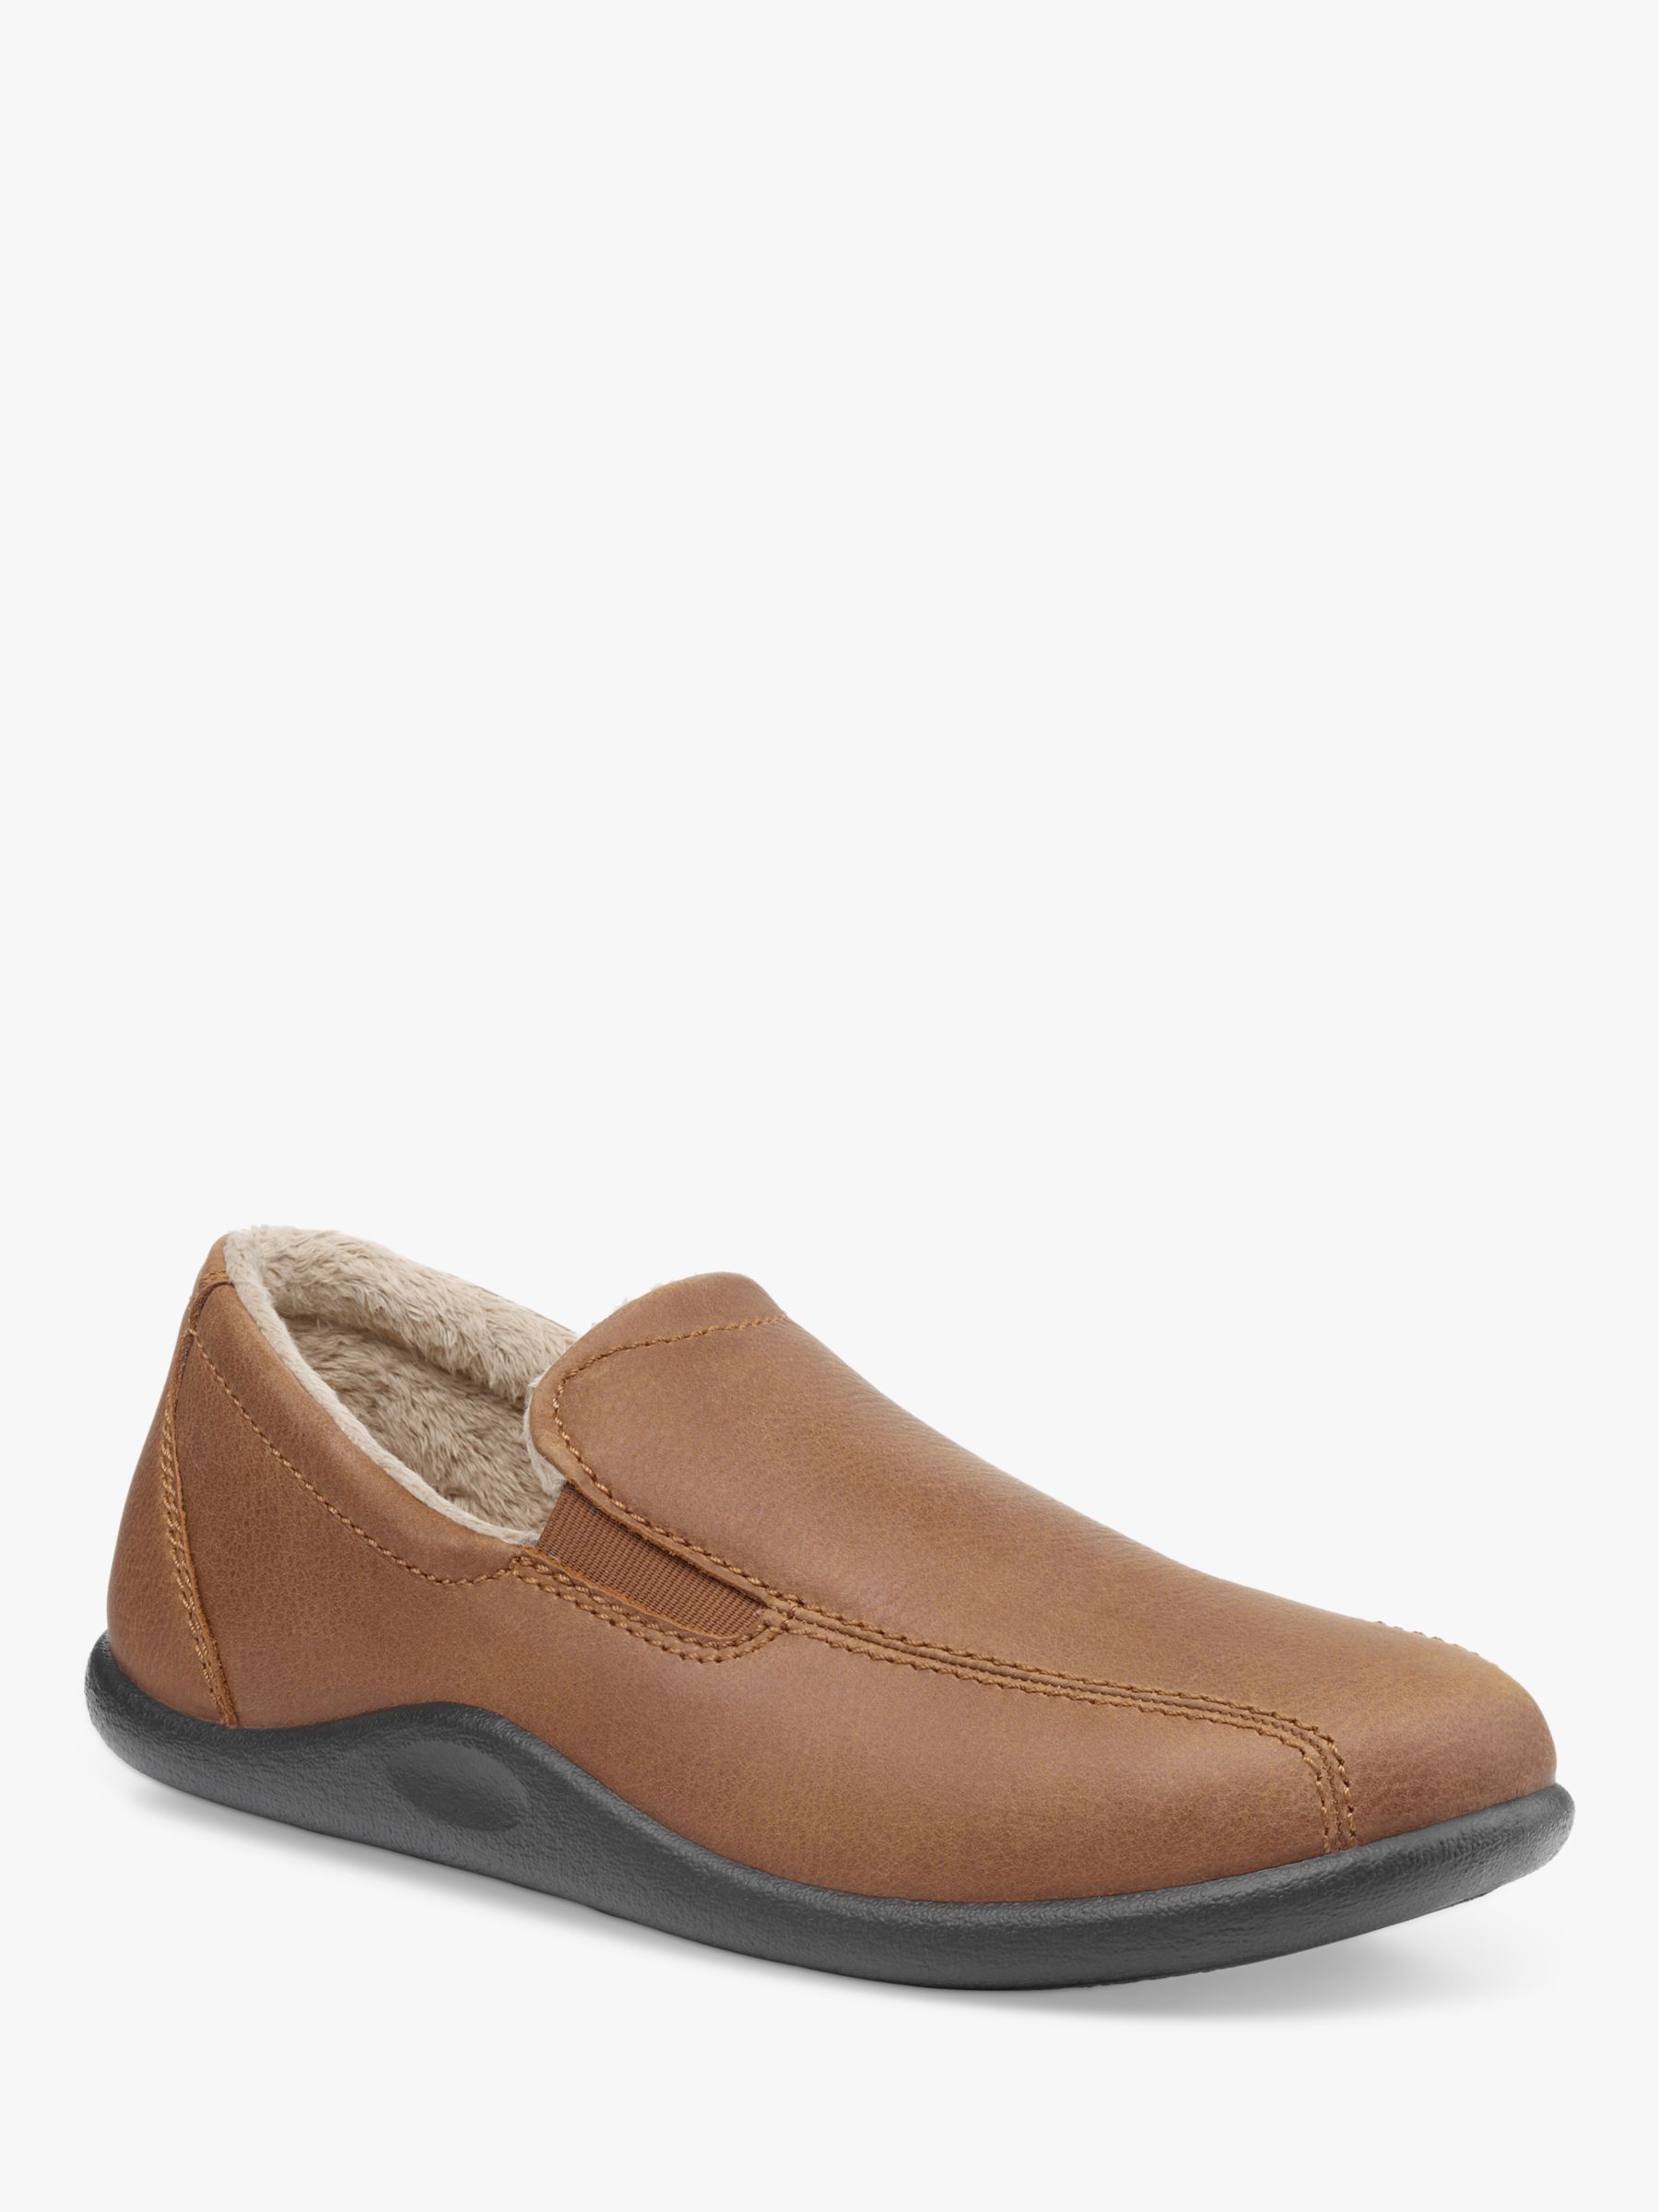 Buy Hotter Relax Leather Slippers Online at johnlewis.com